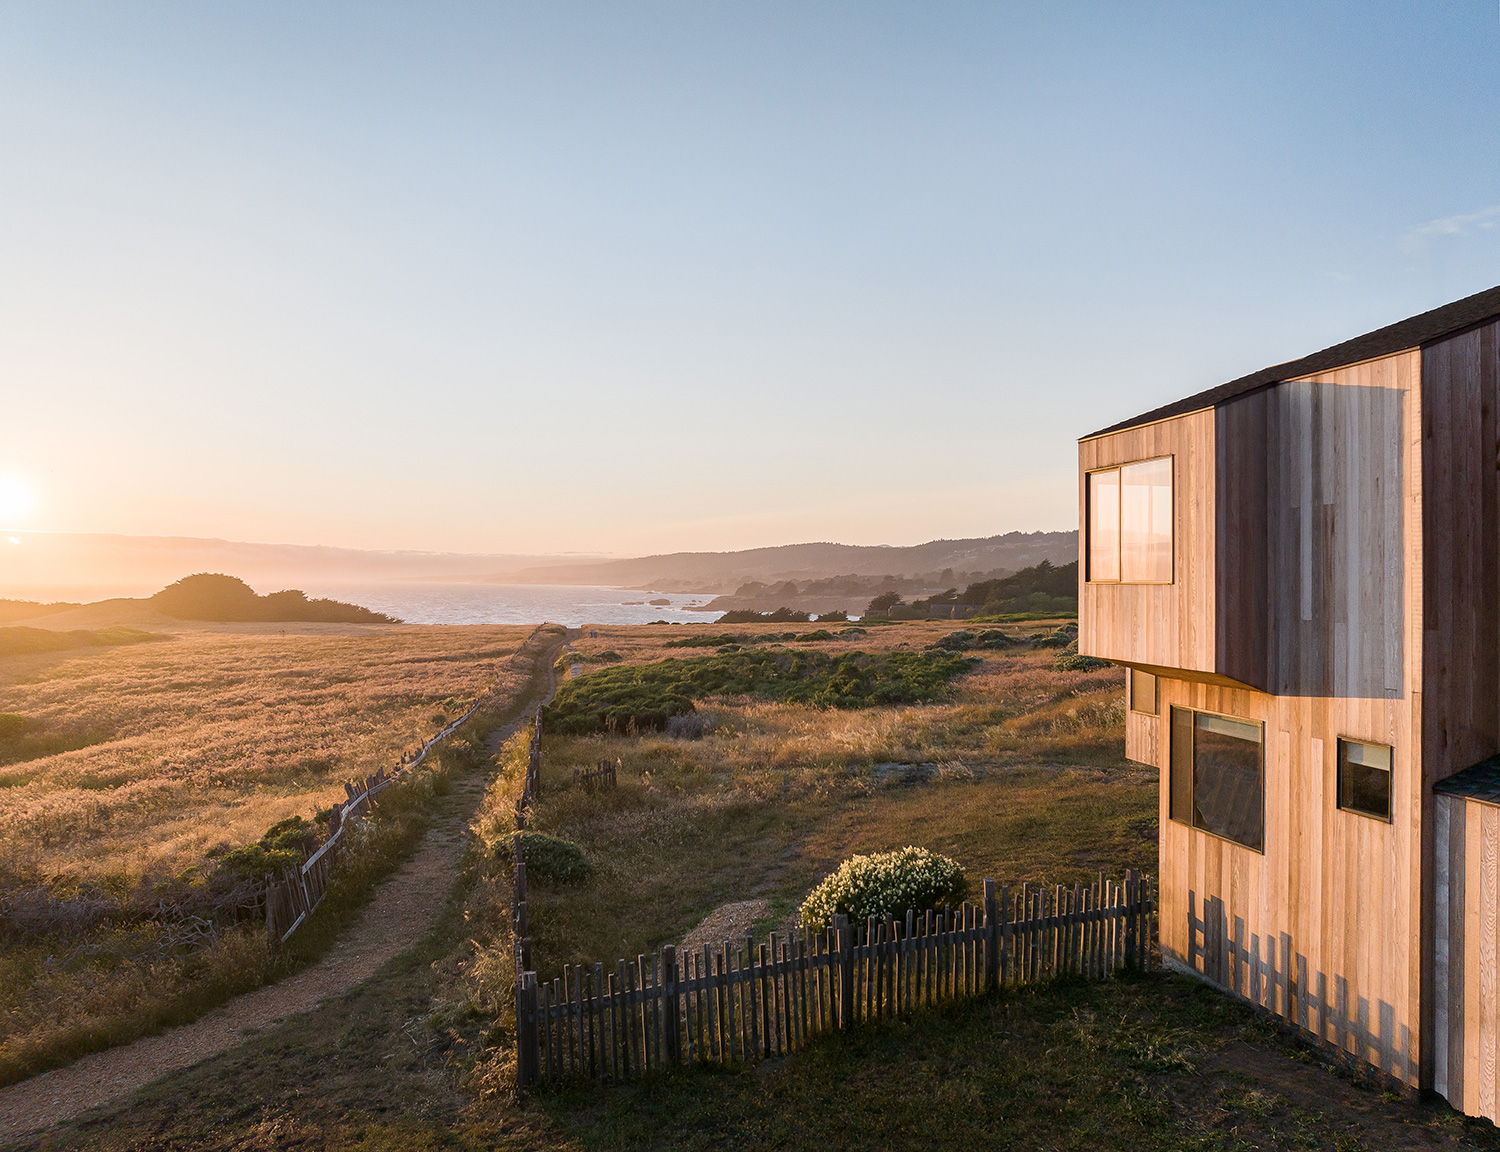 projects - indoor - hotels - design and nature meet at sea ranch lodge